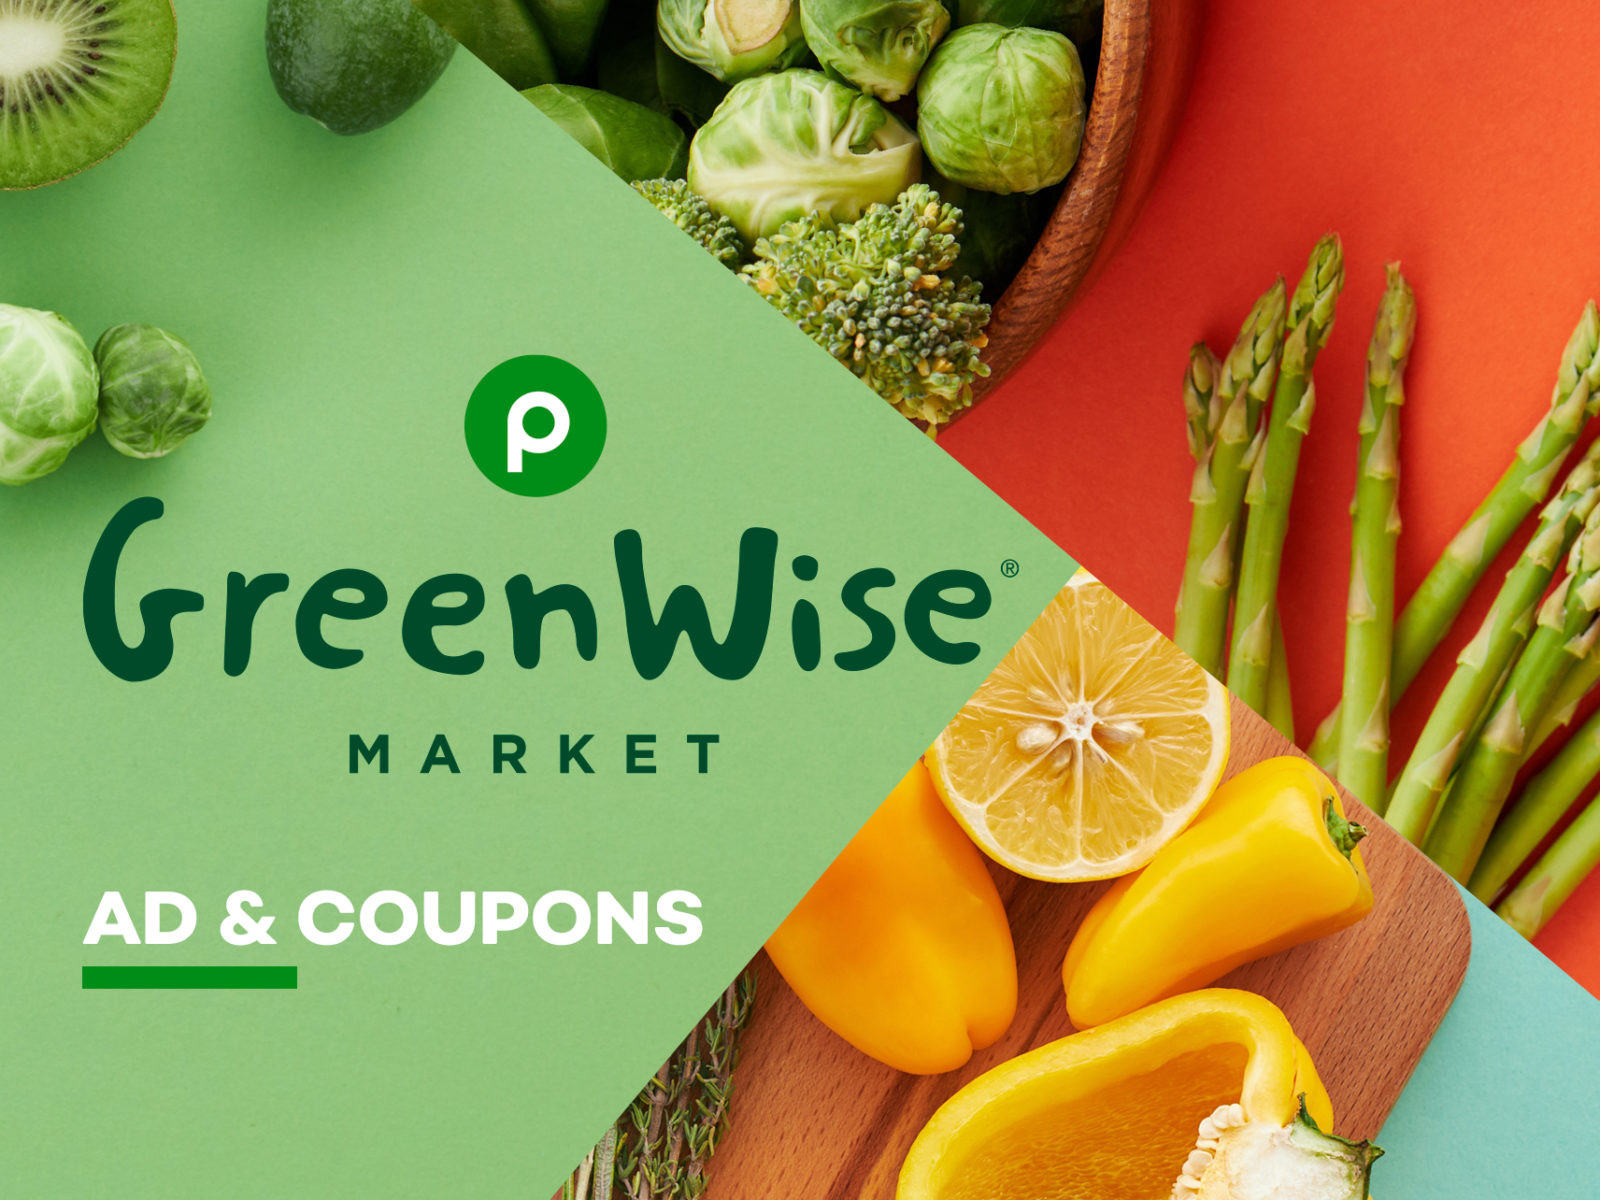 Publix GreenWise Market Ad & Coupons Week Of 3/30 to 4/8 (3/29 to 4/8 For Some)